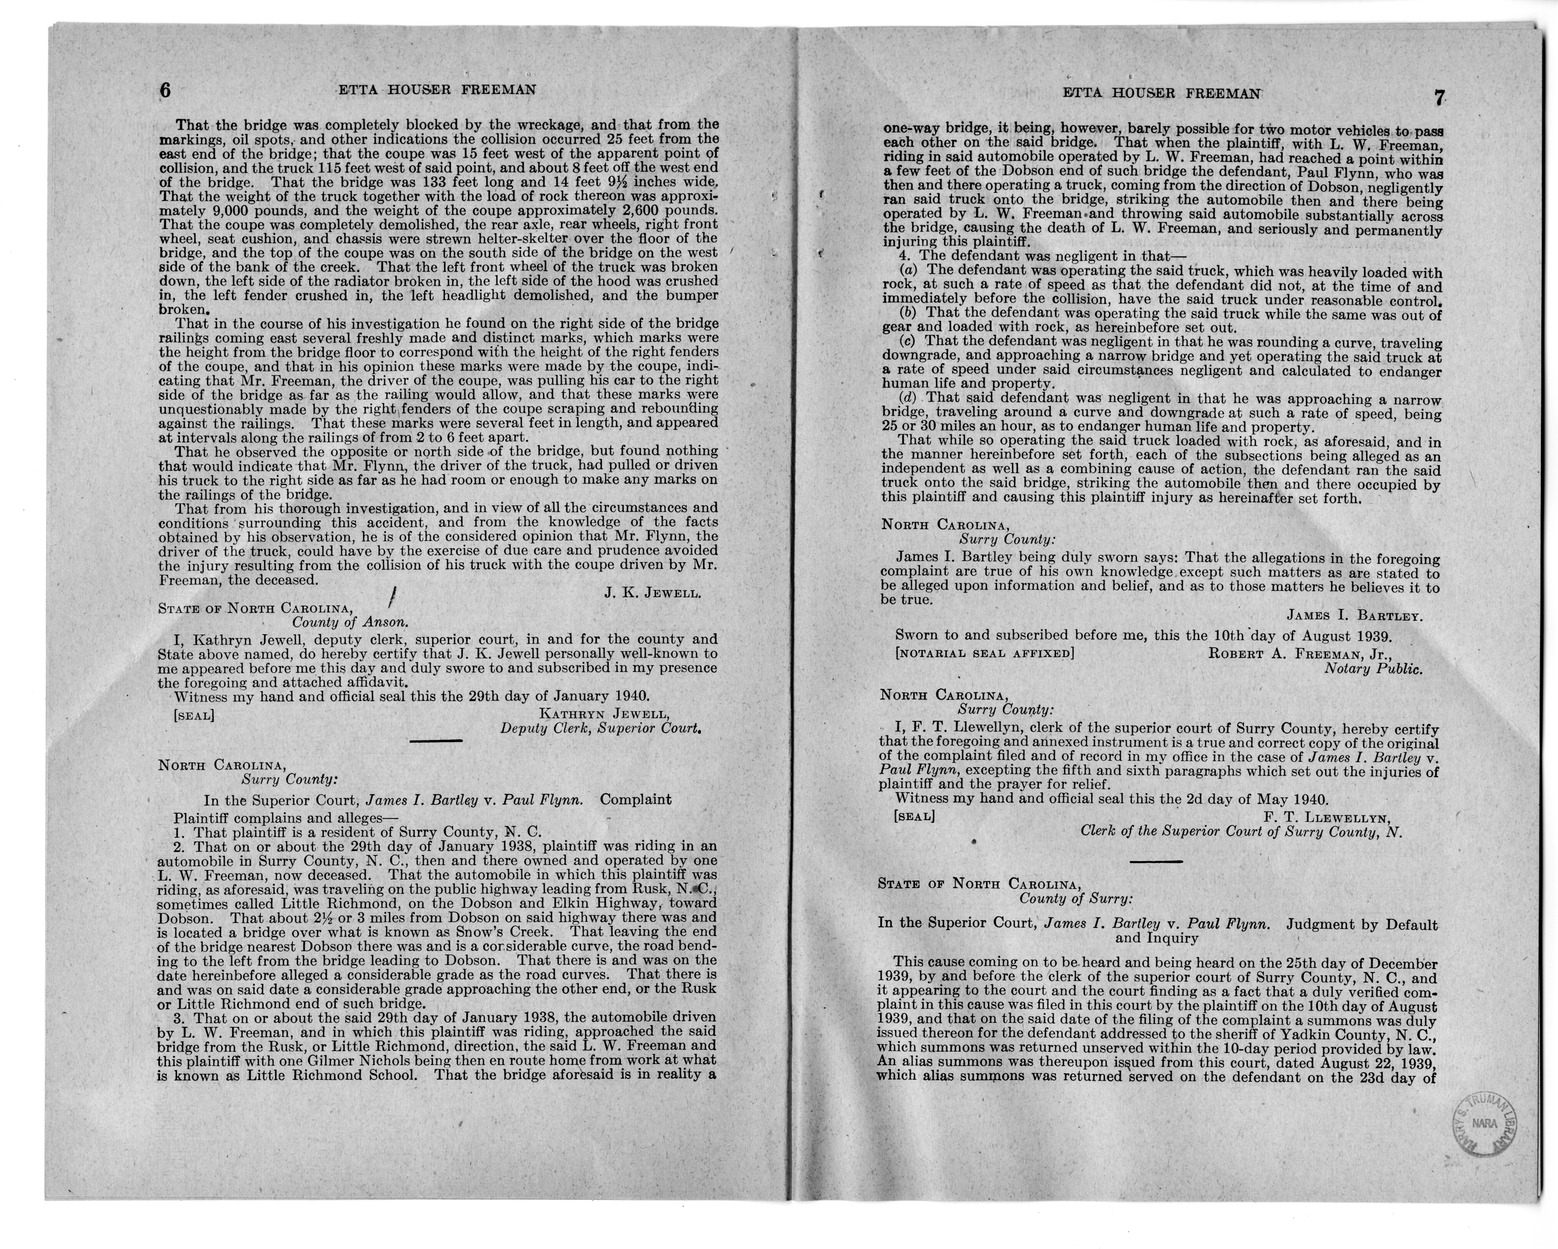 Memorandum from Frederick J. Bailey to M. C. Latta, S. 1199, Conferring Jurisdiction Upon the United States District Court for the Middle District of North Carolina to Hear, Determine, and Render Judgment Upon Any Claim Arising Out of the Death of L. W. Freeman, with Attachments